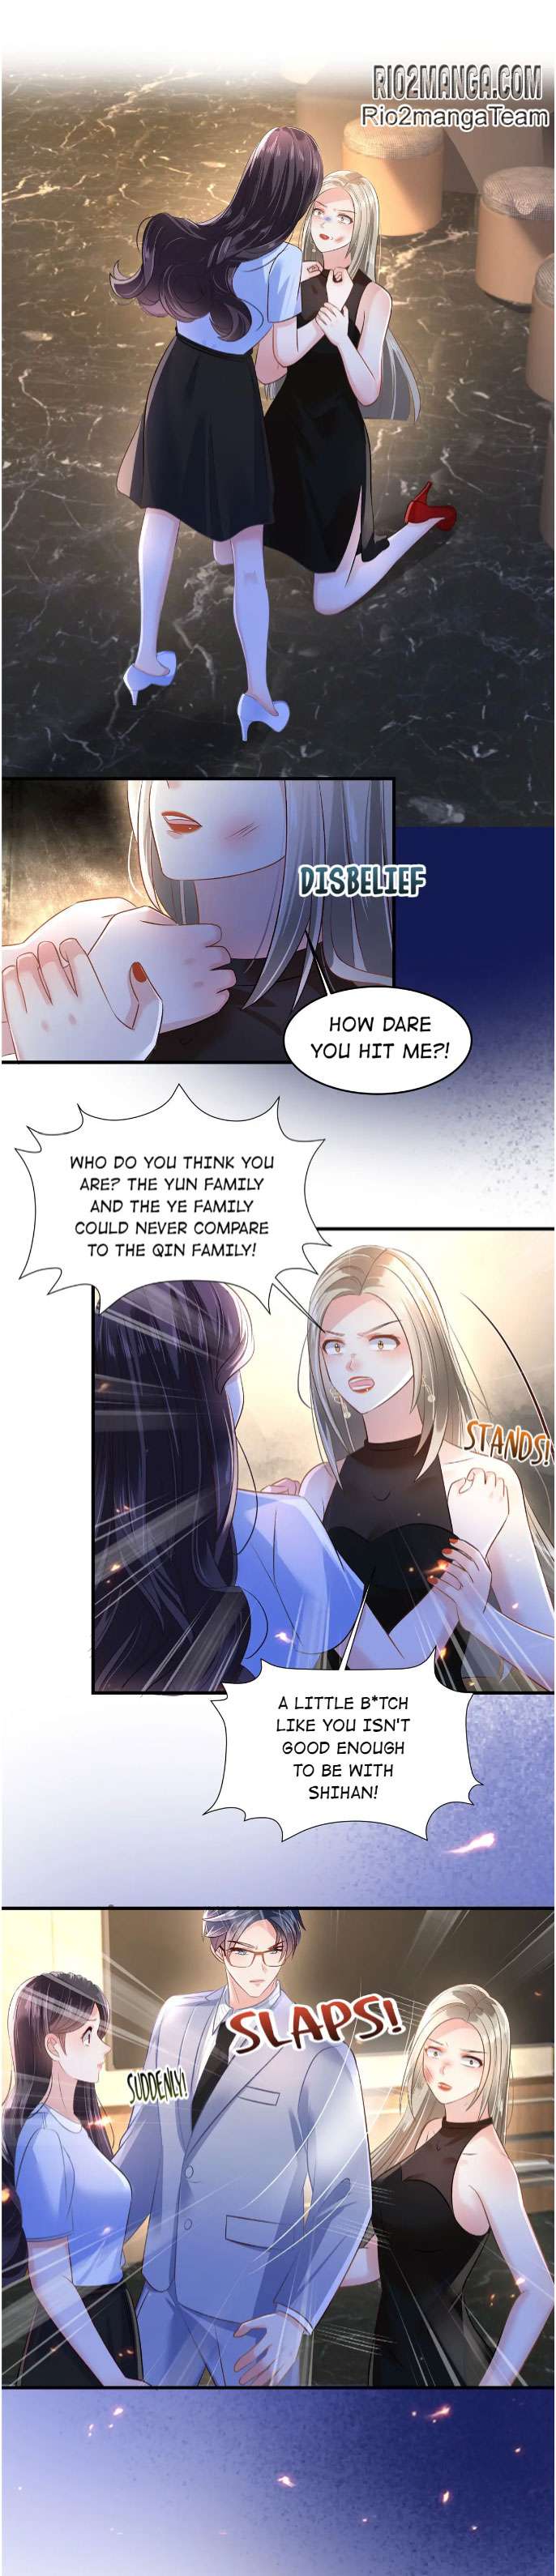 Rebirth: Giving You My Exclusive Affection - chapter 292 - #2